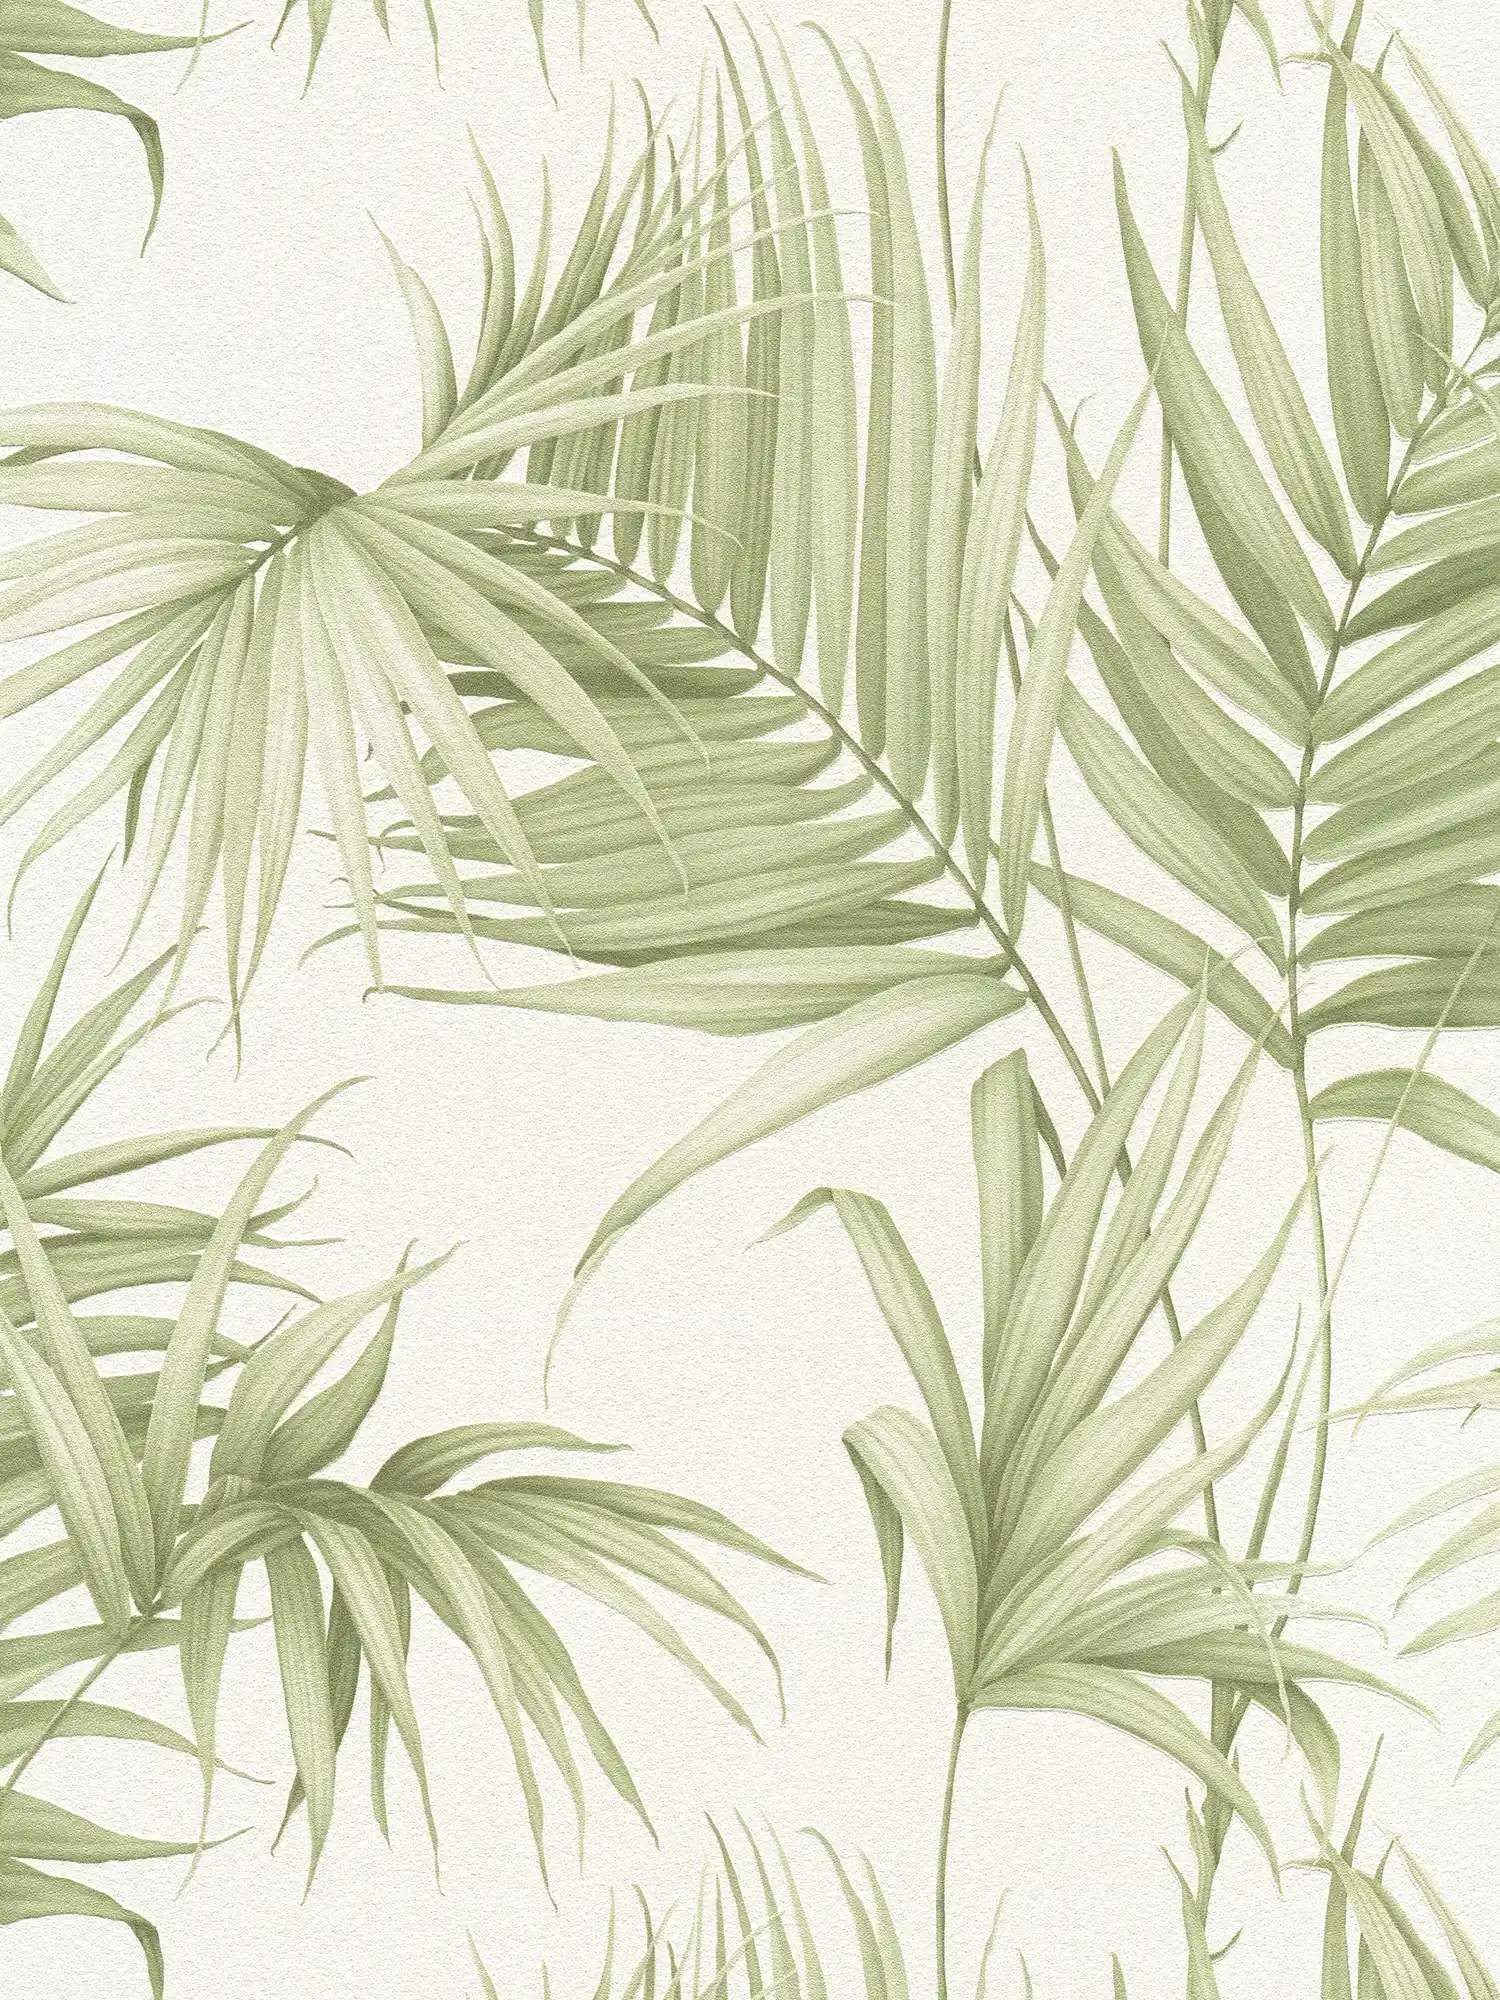 Leaves wallpaper with exotic fern leaves - green, white
